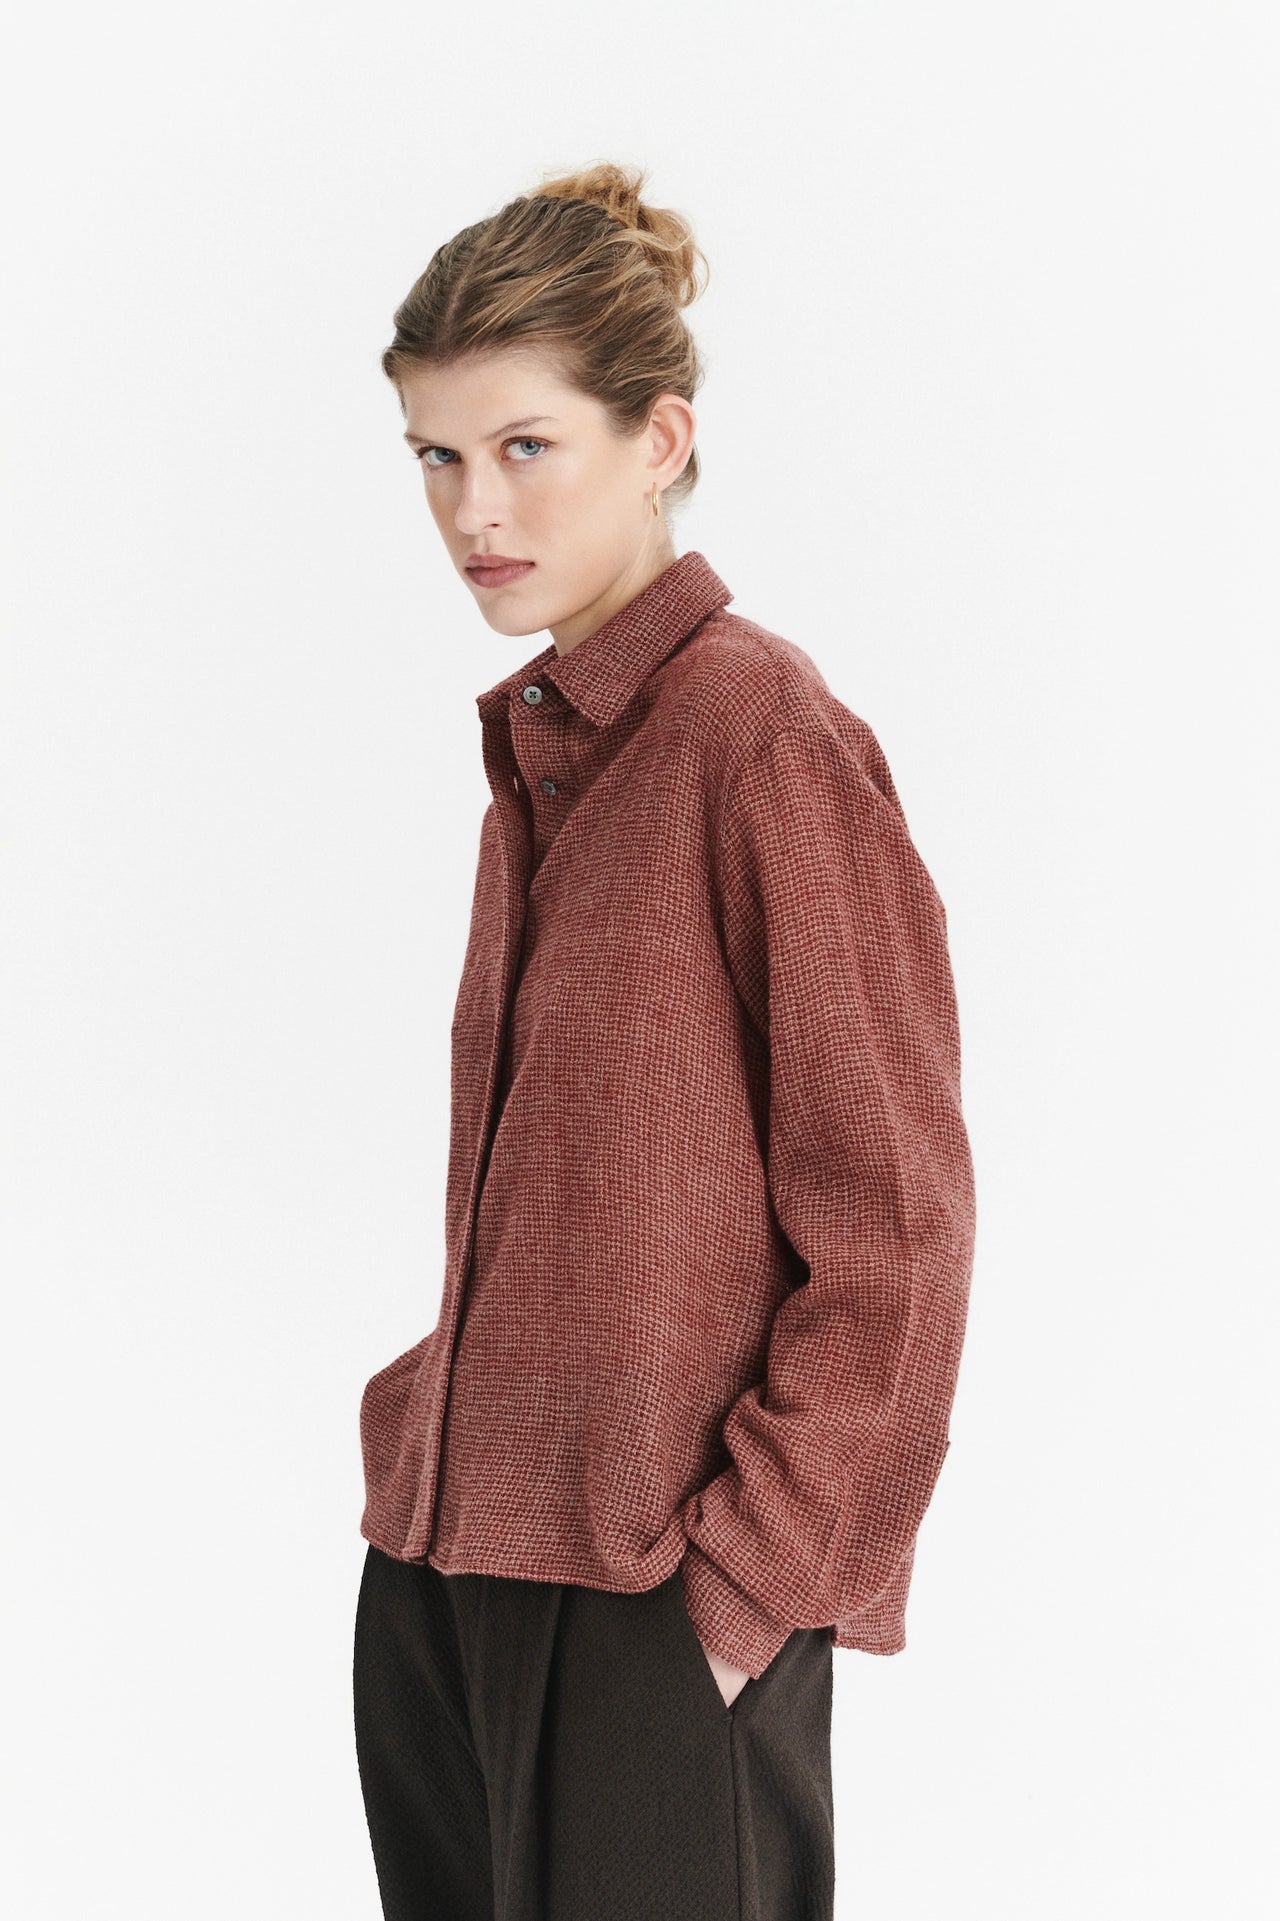 Relaxed Cropped Blouse in the Finest Worsted Wool from Japan